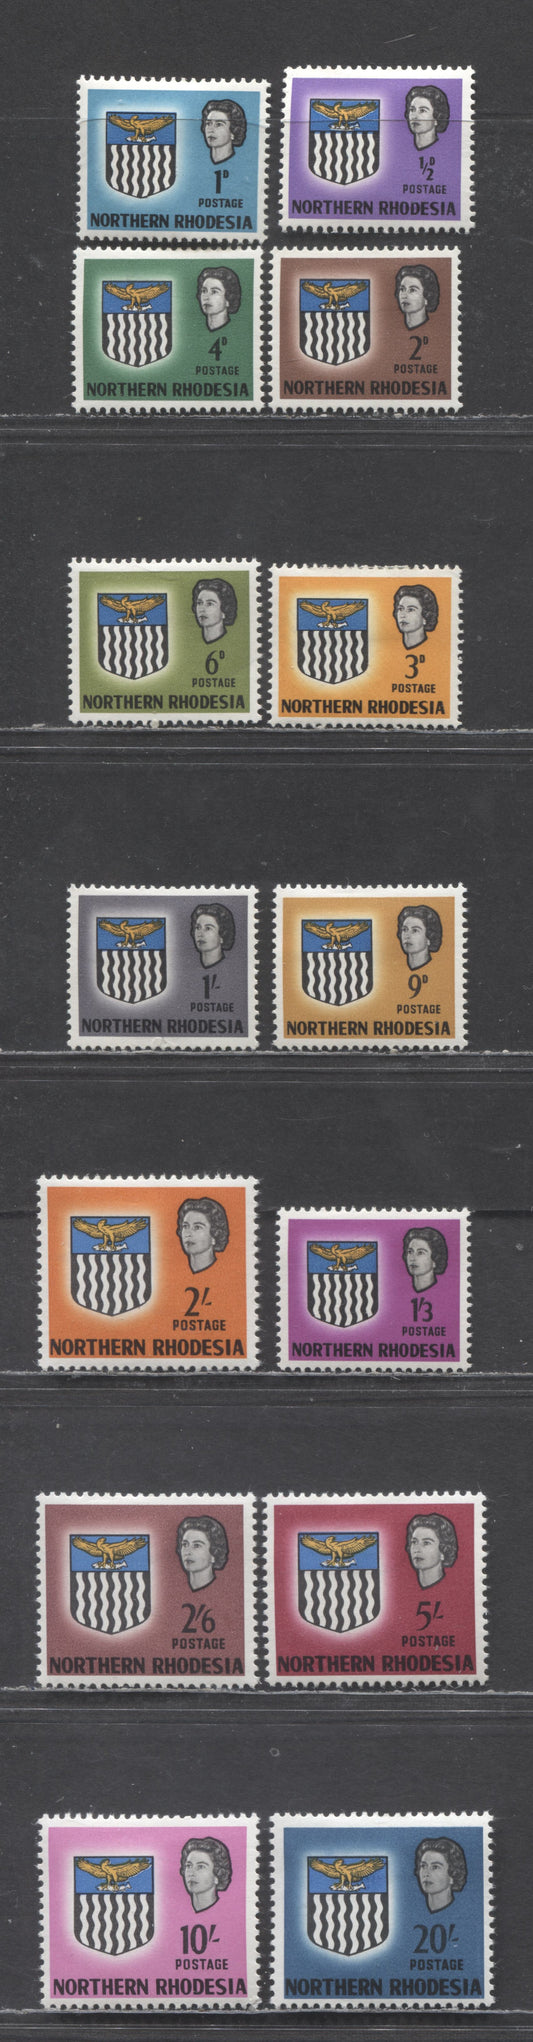 Lot 90 Northern Rhodesia SC#75-88 1963 Arms Issue, 14 VFOG Singles, Click on Listing to See ALL Pictures, Estimated Value $31